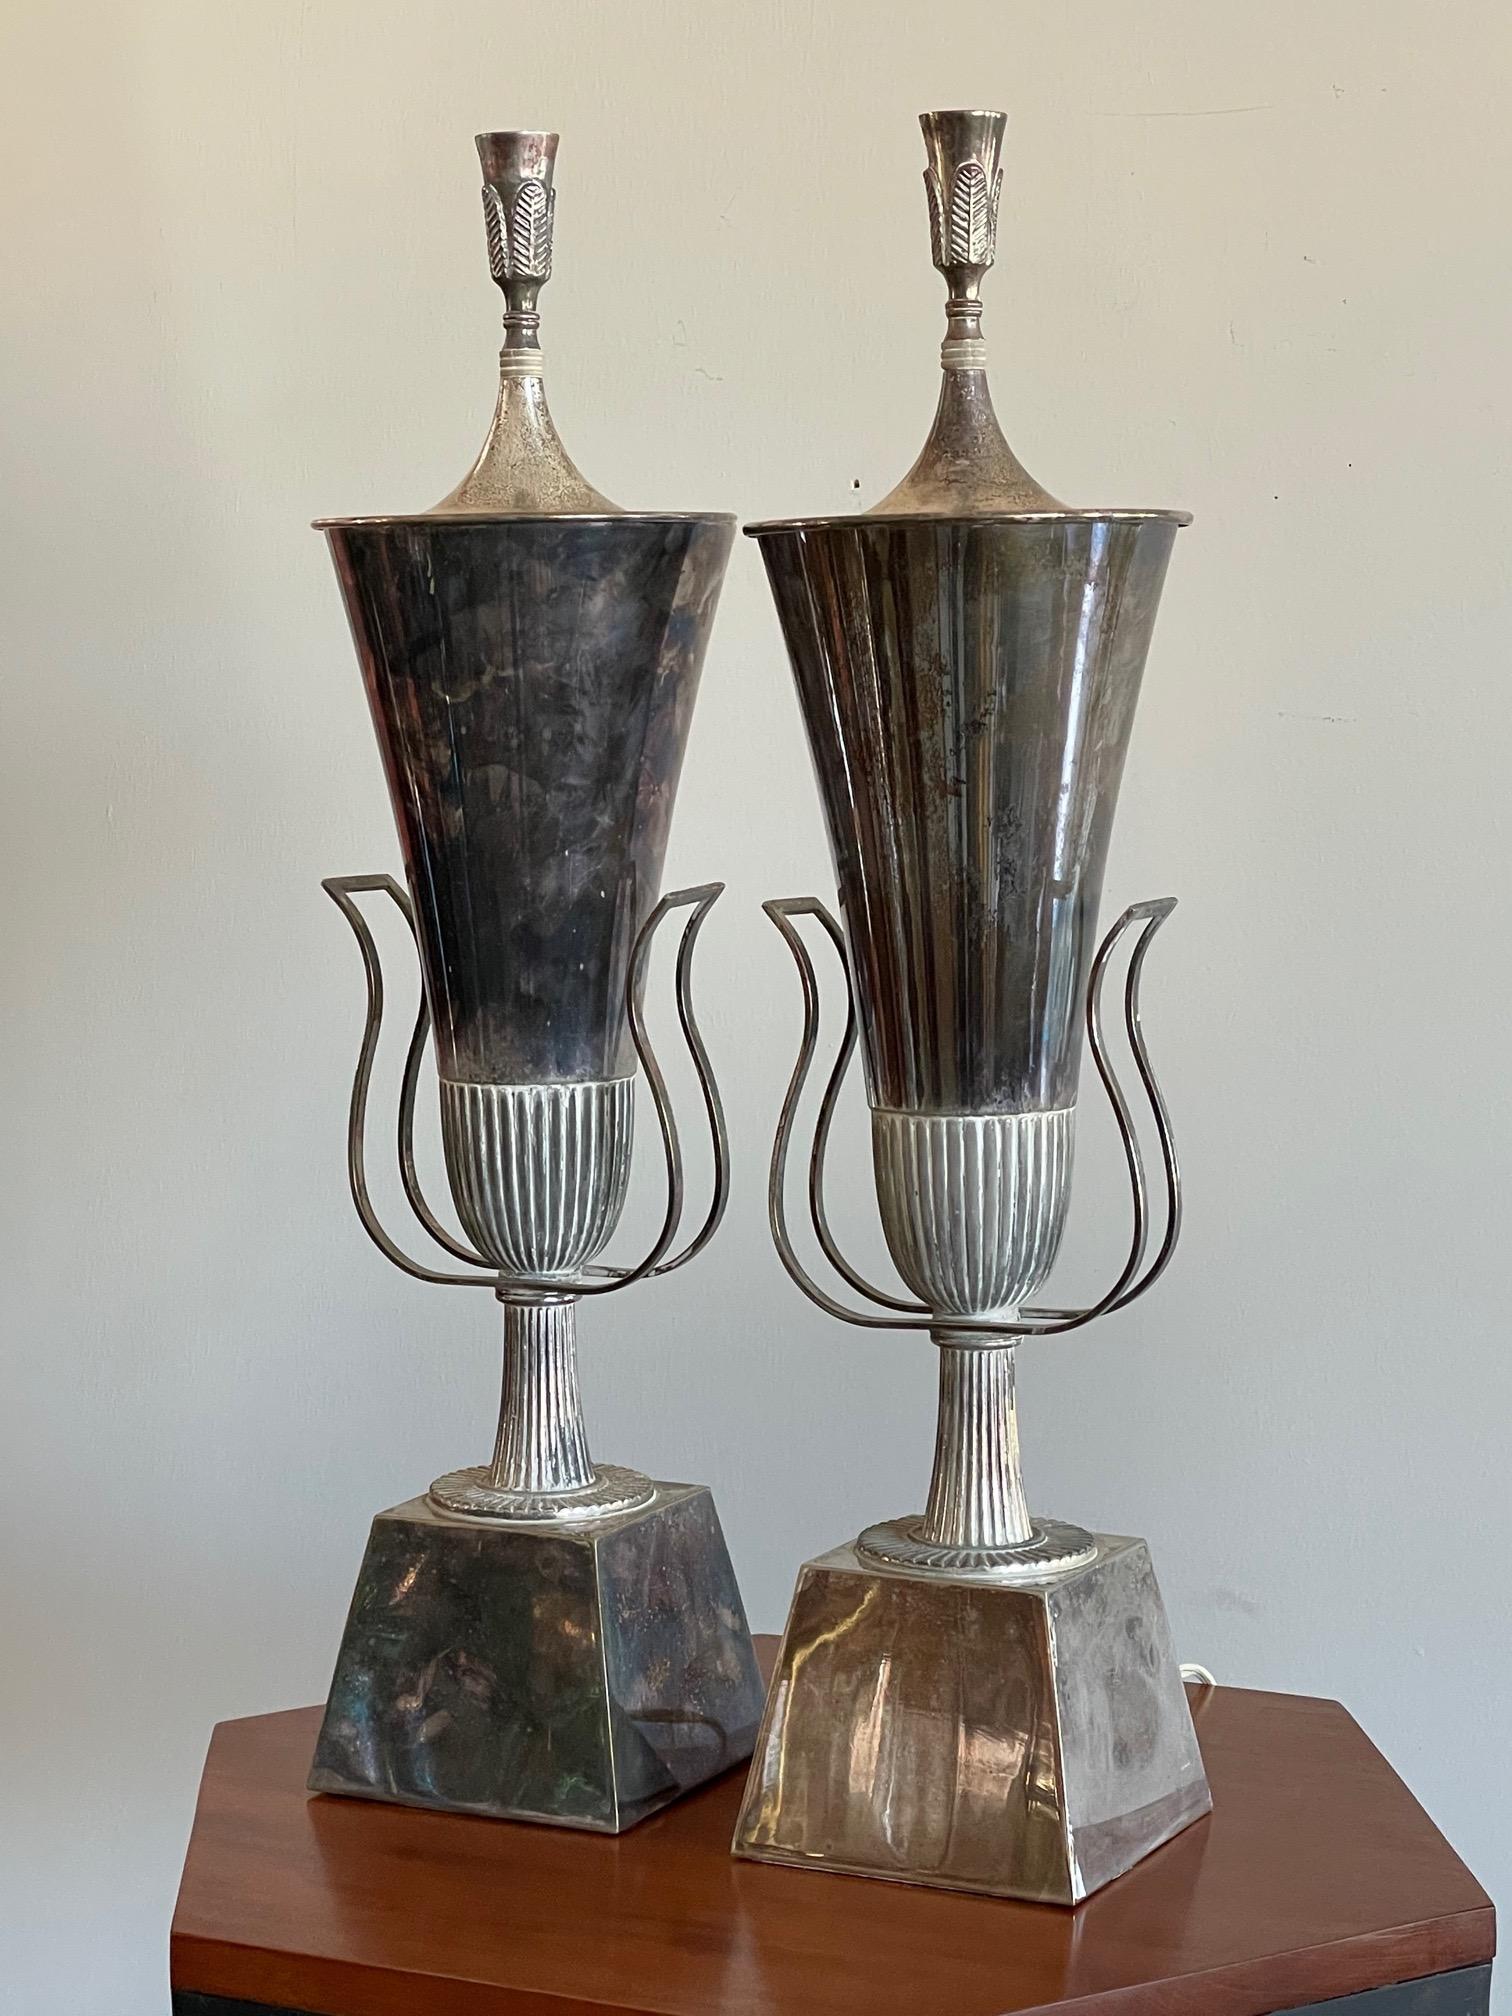 A pair of classic Hollywood Regency table lamps by Tommi Parzinger, Lightolier. Silverplate, complete with covers.